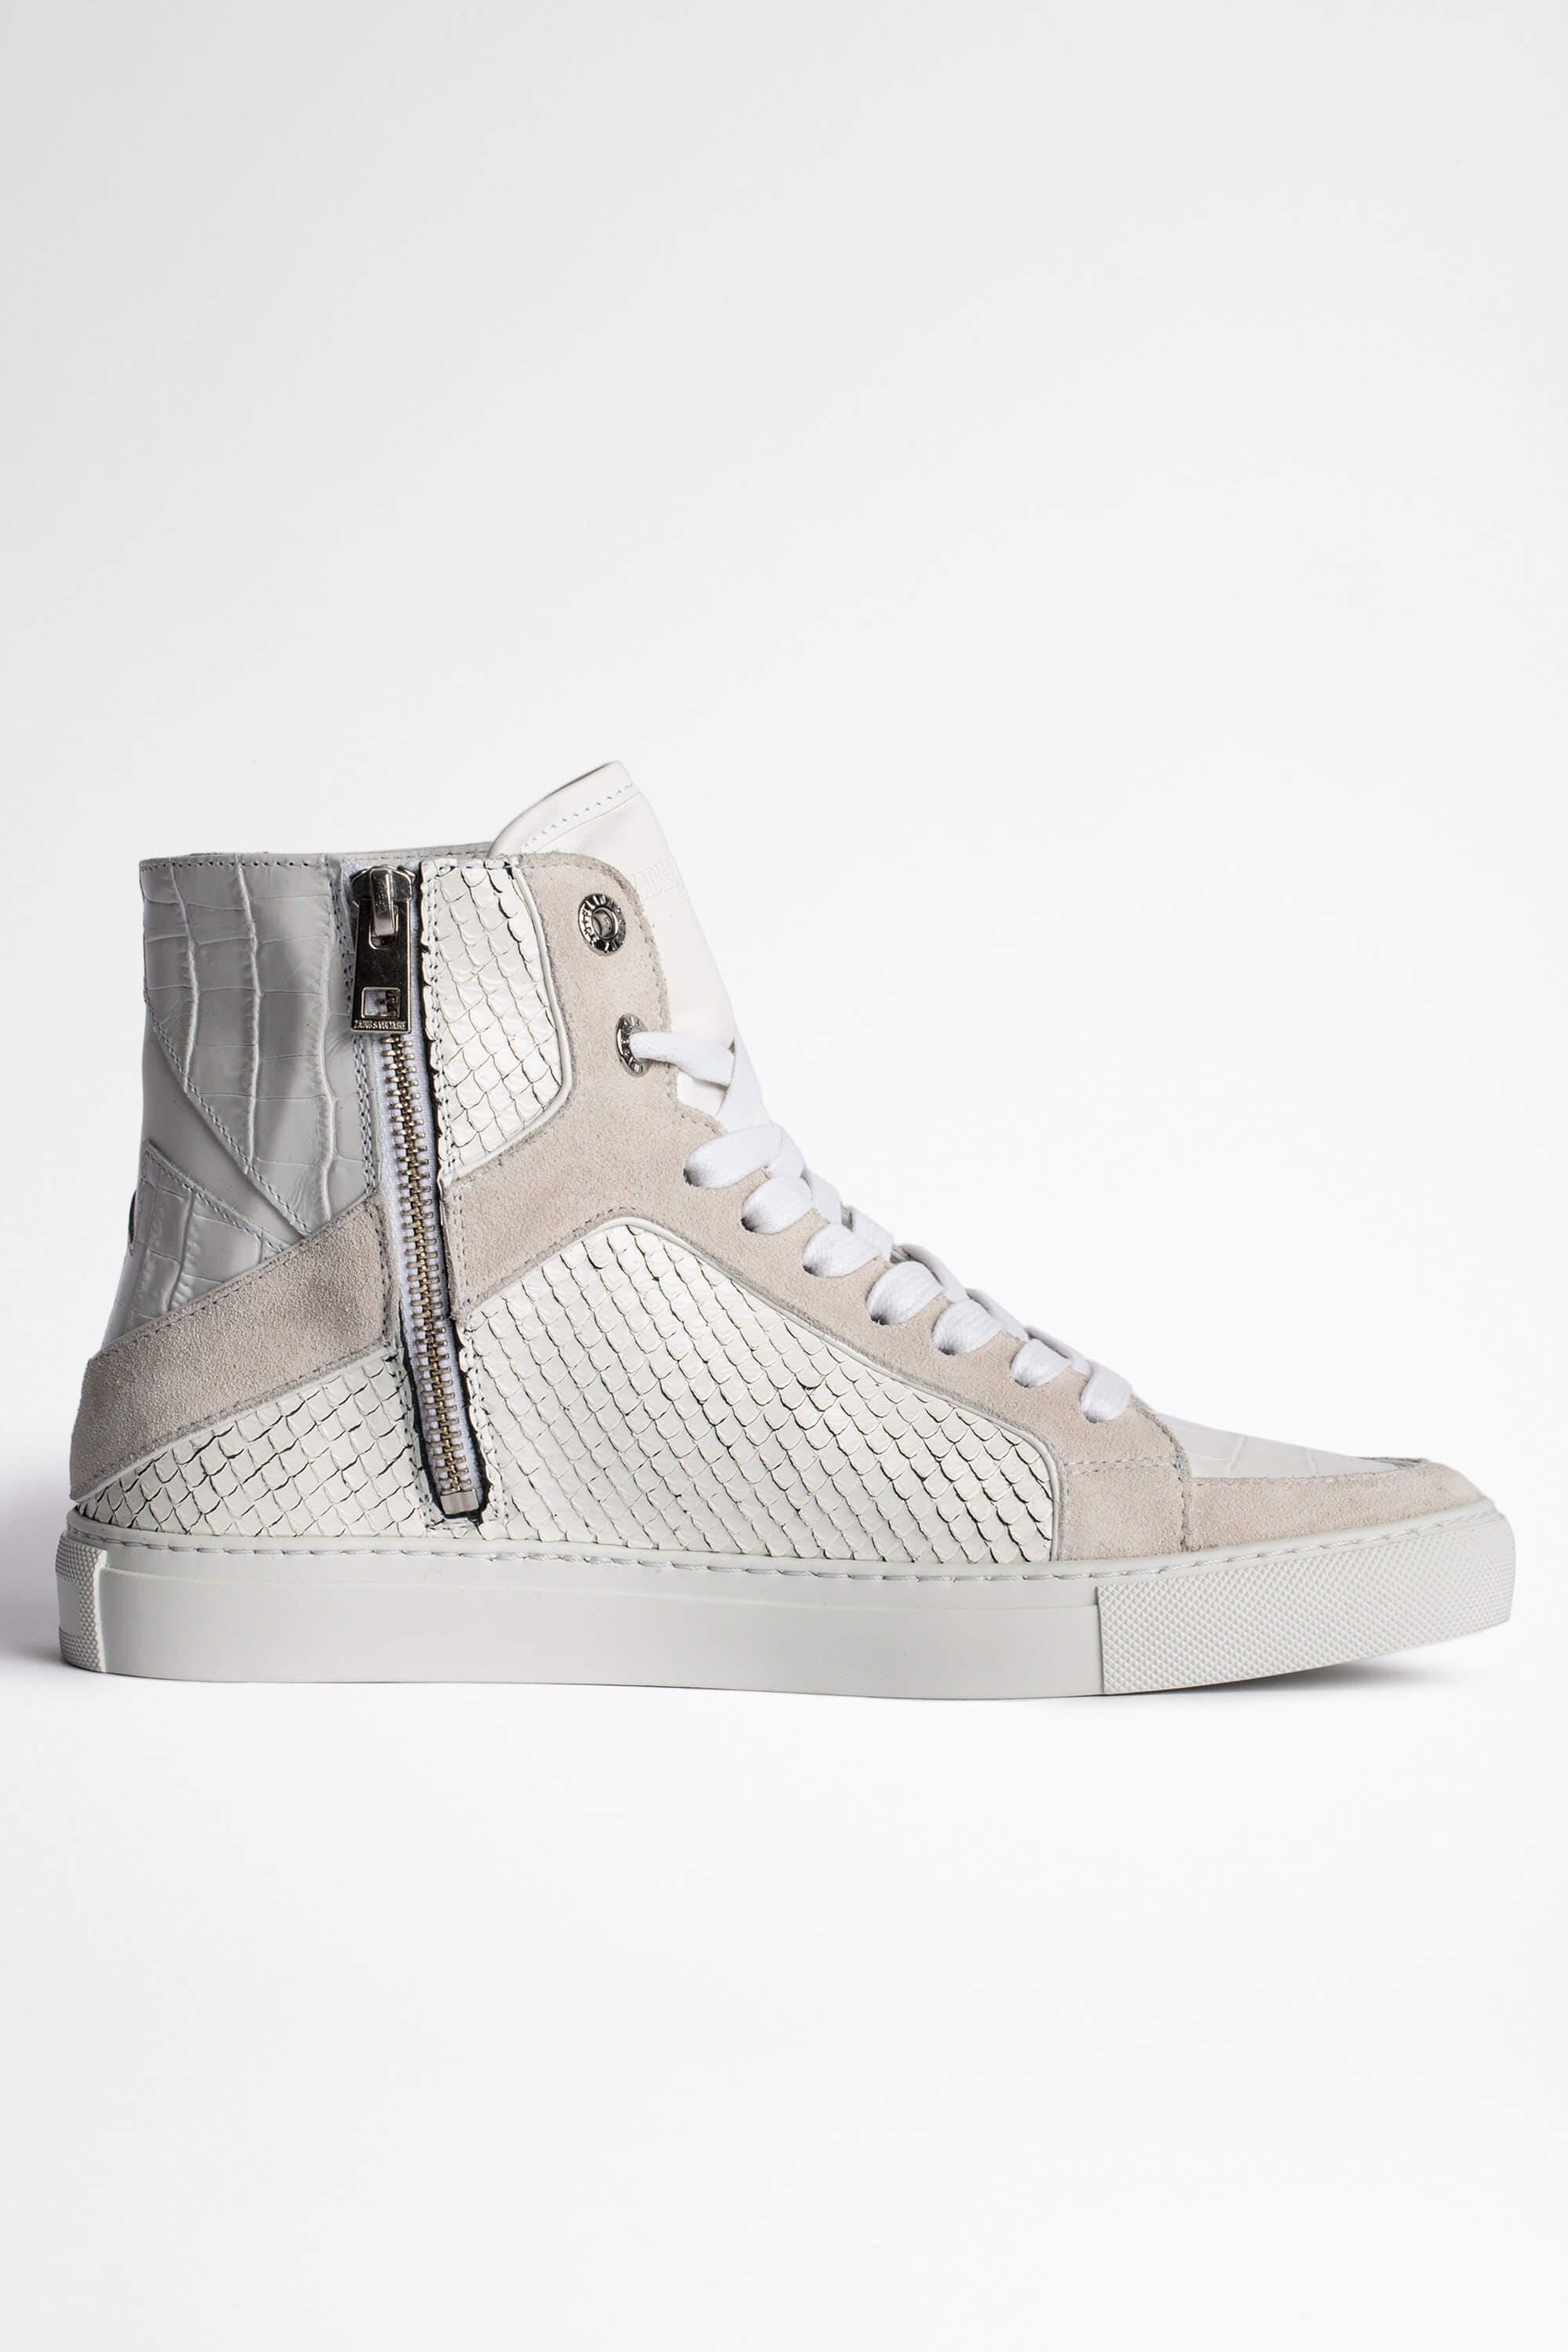 Zadig & Voltaire Zv1747 High Flash Keith Sneakers Leather in White 